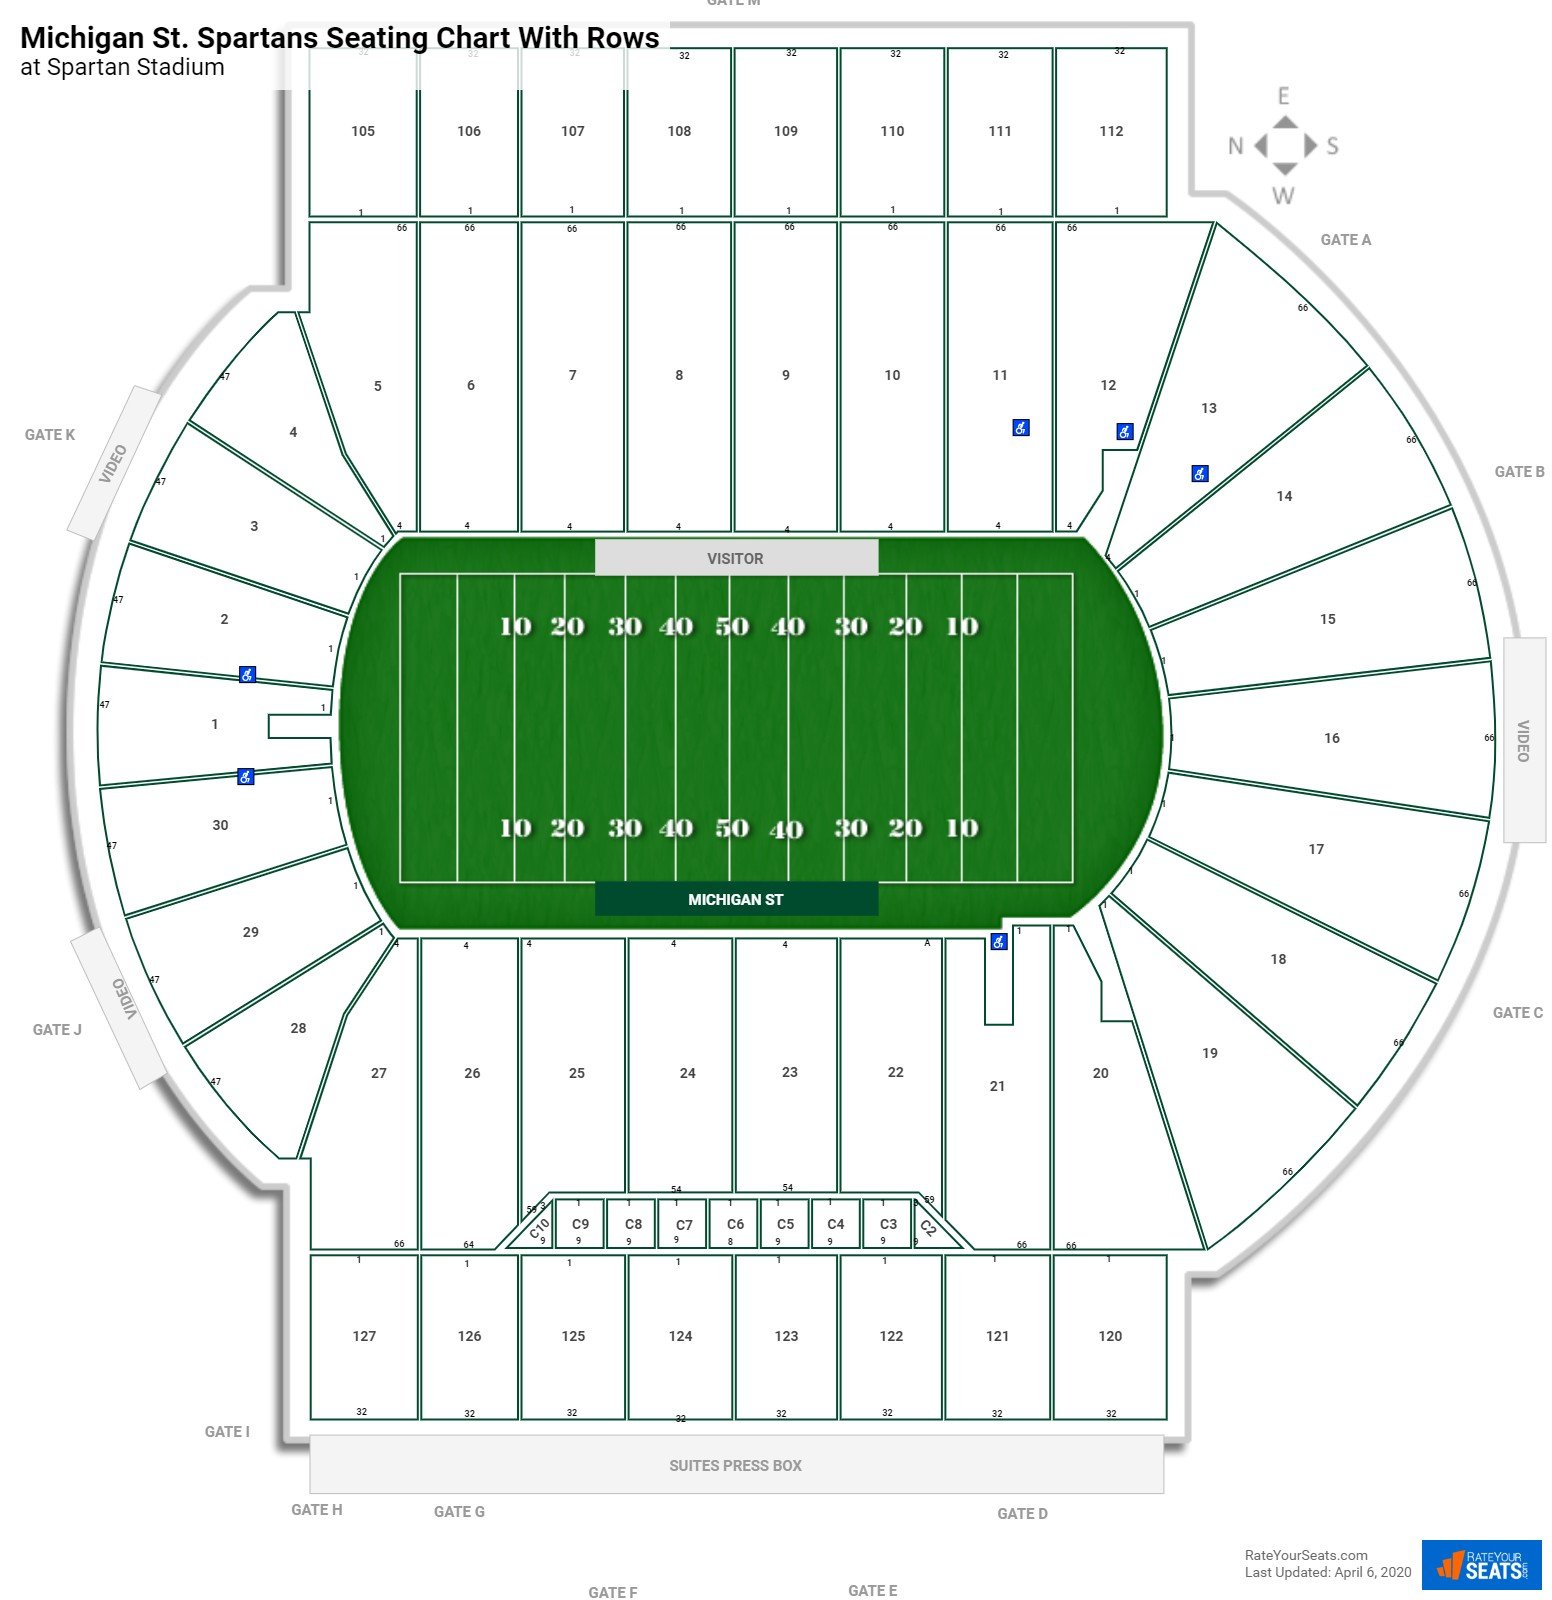 Spartan Stadium seating chart with row numbers